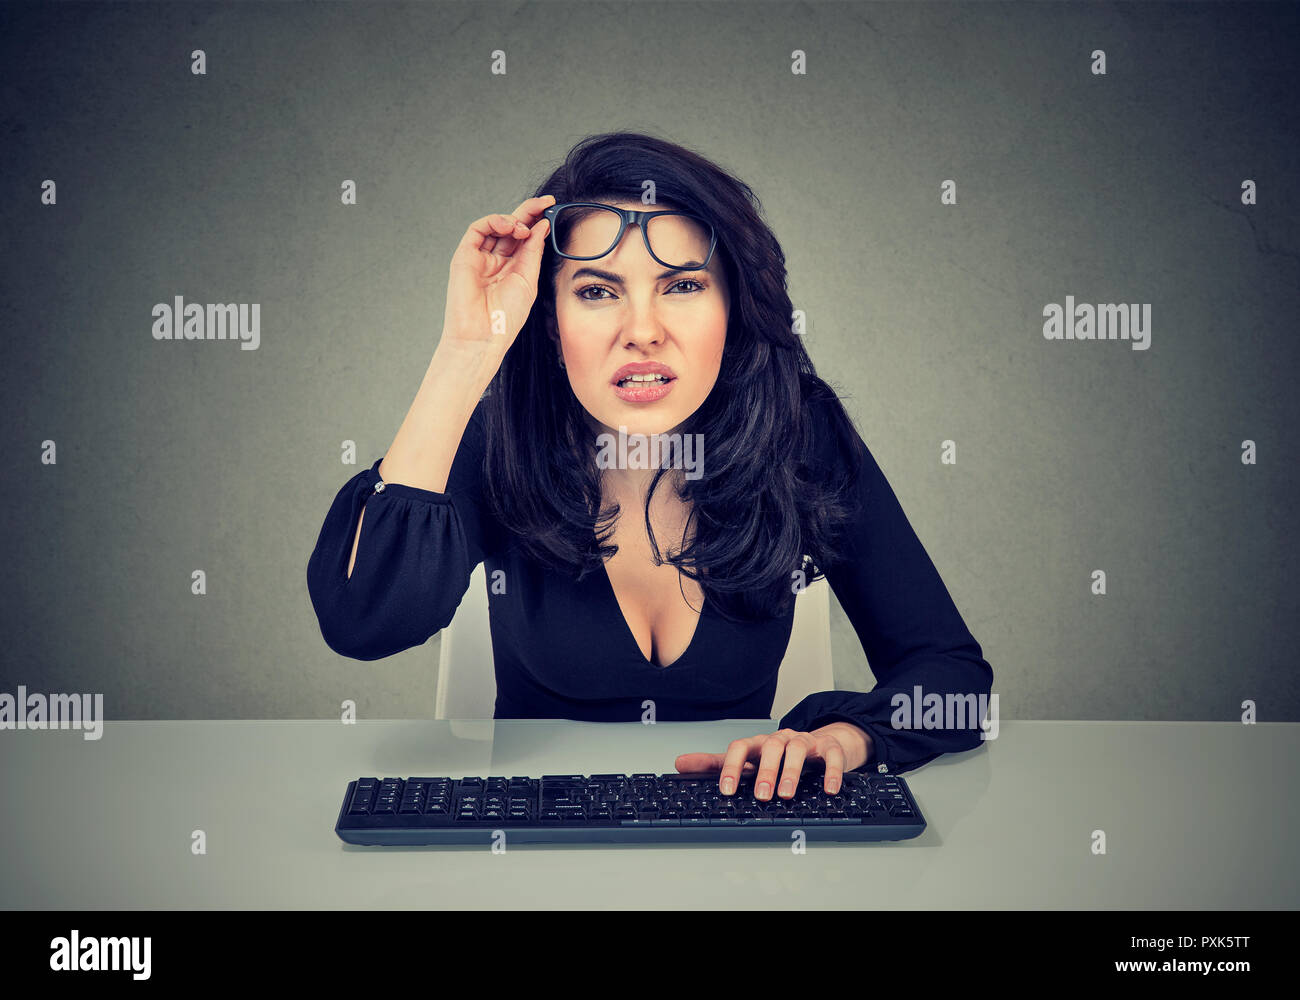 Young business woman using keyboard and squinting eyes having vision problems on gray background Stock Photo